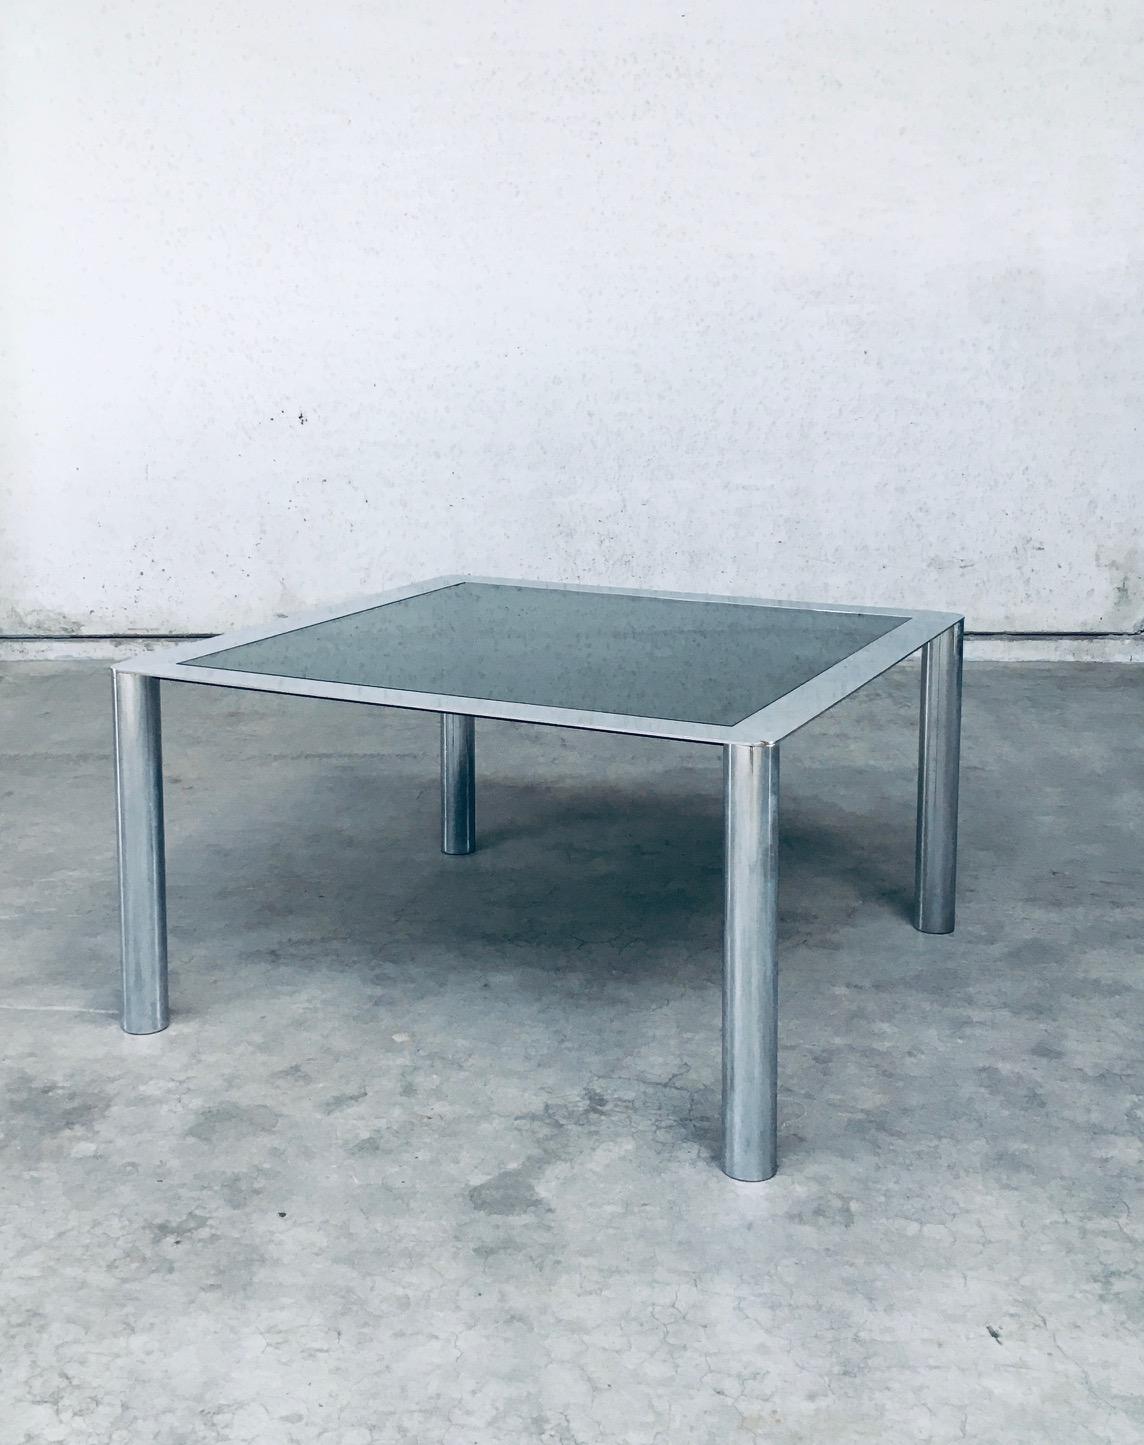 Vintage Midcentury Modern Italian Design Smoked Glass & Chromed Steel Large Square Dining Table. Designed by Sergio Mazza for Cinova. Made in Italy 1970's period. This is a majestic dining table that easily seats 6 to 8 people. This comes in good